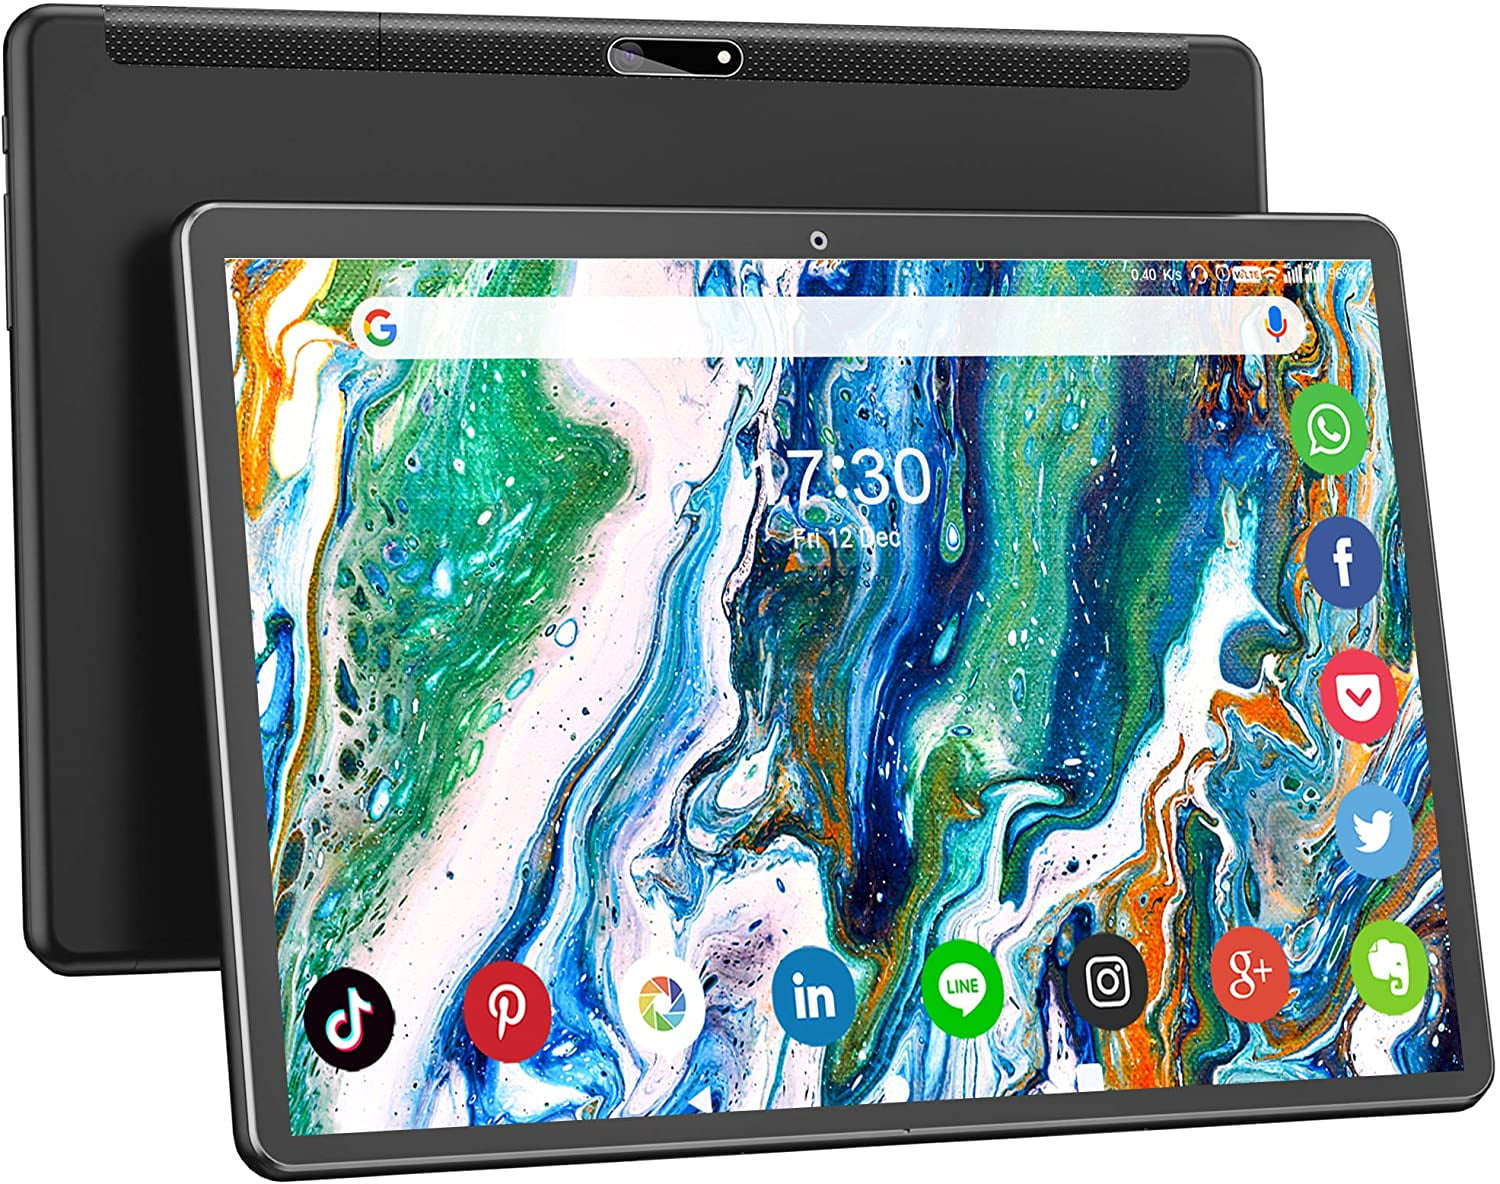 Canteen Less cafeteria 10.1" Android Tablet,Android 9.0 Phone Call Tablet,2 GB RAM,32 GB ROM  Storage,Quad-Core Processor,Black Tablet,HD Touchscreen Tablet,GPS,WIFI  Tablet,Summer Sale,back to school gift - Walmart.com